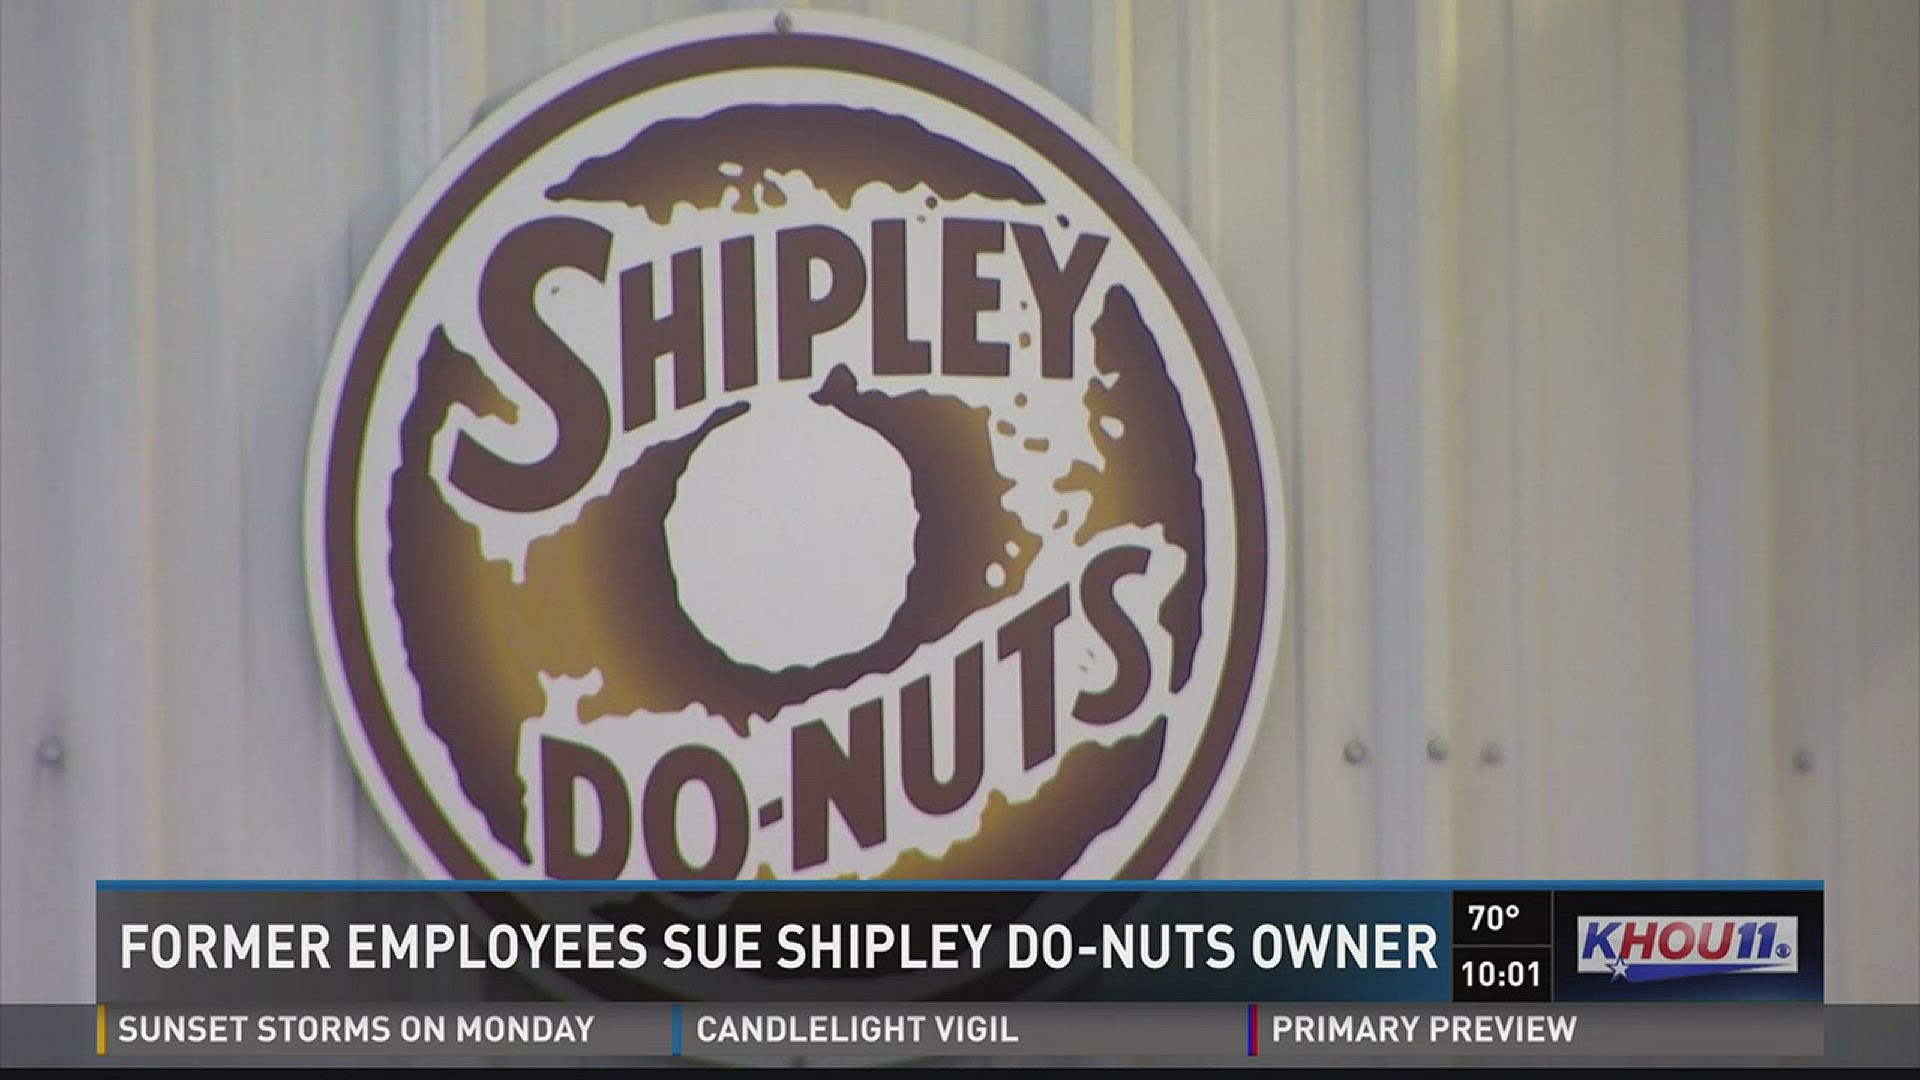 A lawsuit filed against Shipley's Do-Nuts and its owner is now making its way through state court with claims of sexual harassment and racial discrimination against three former employees.